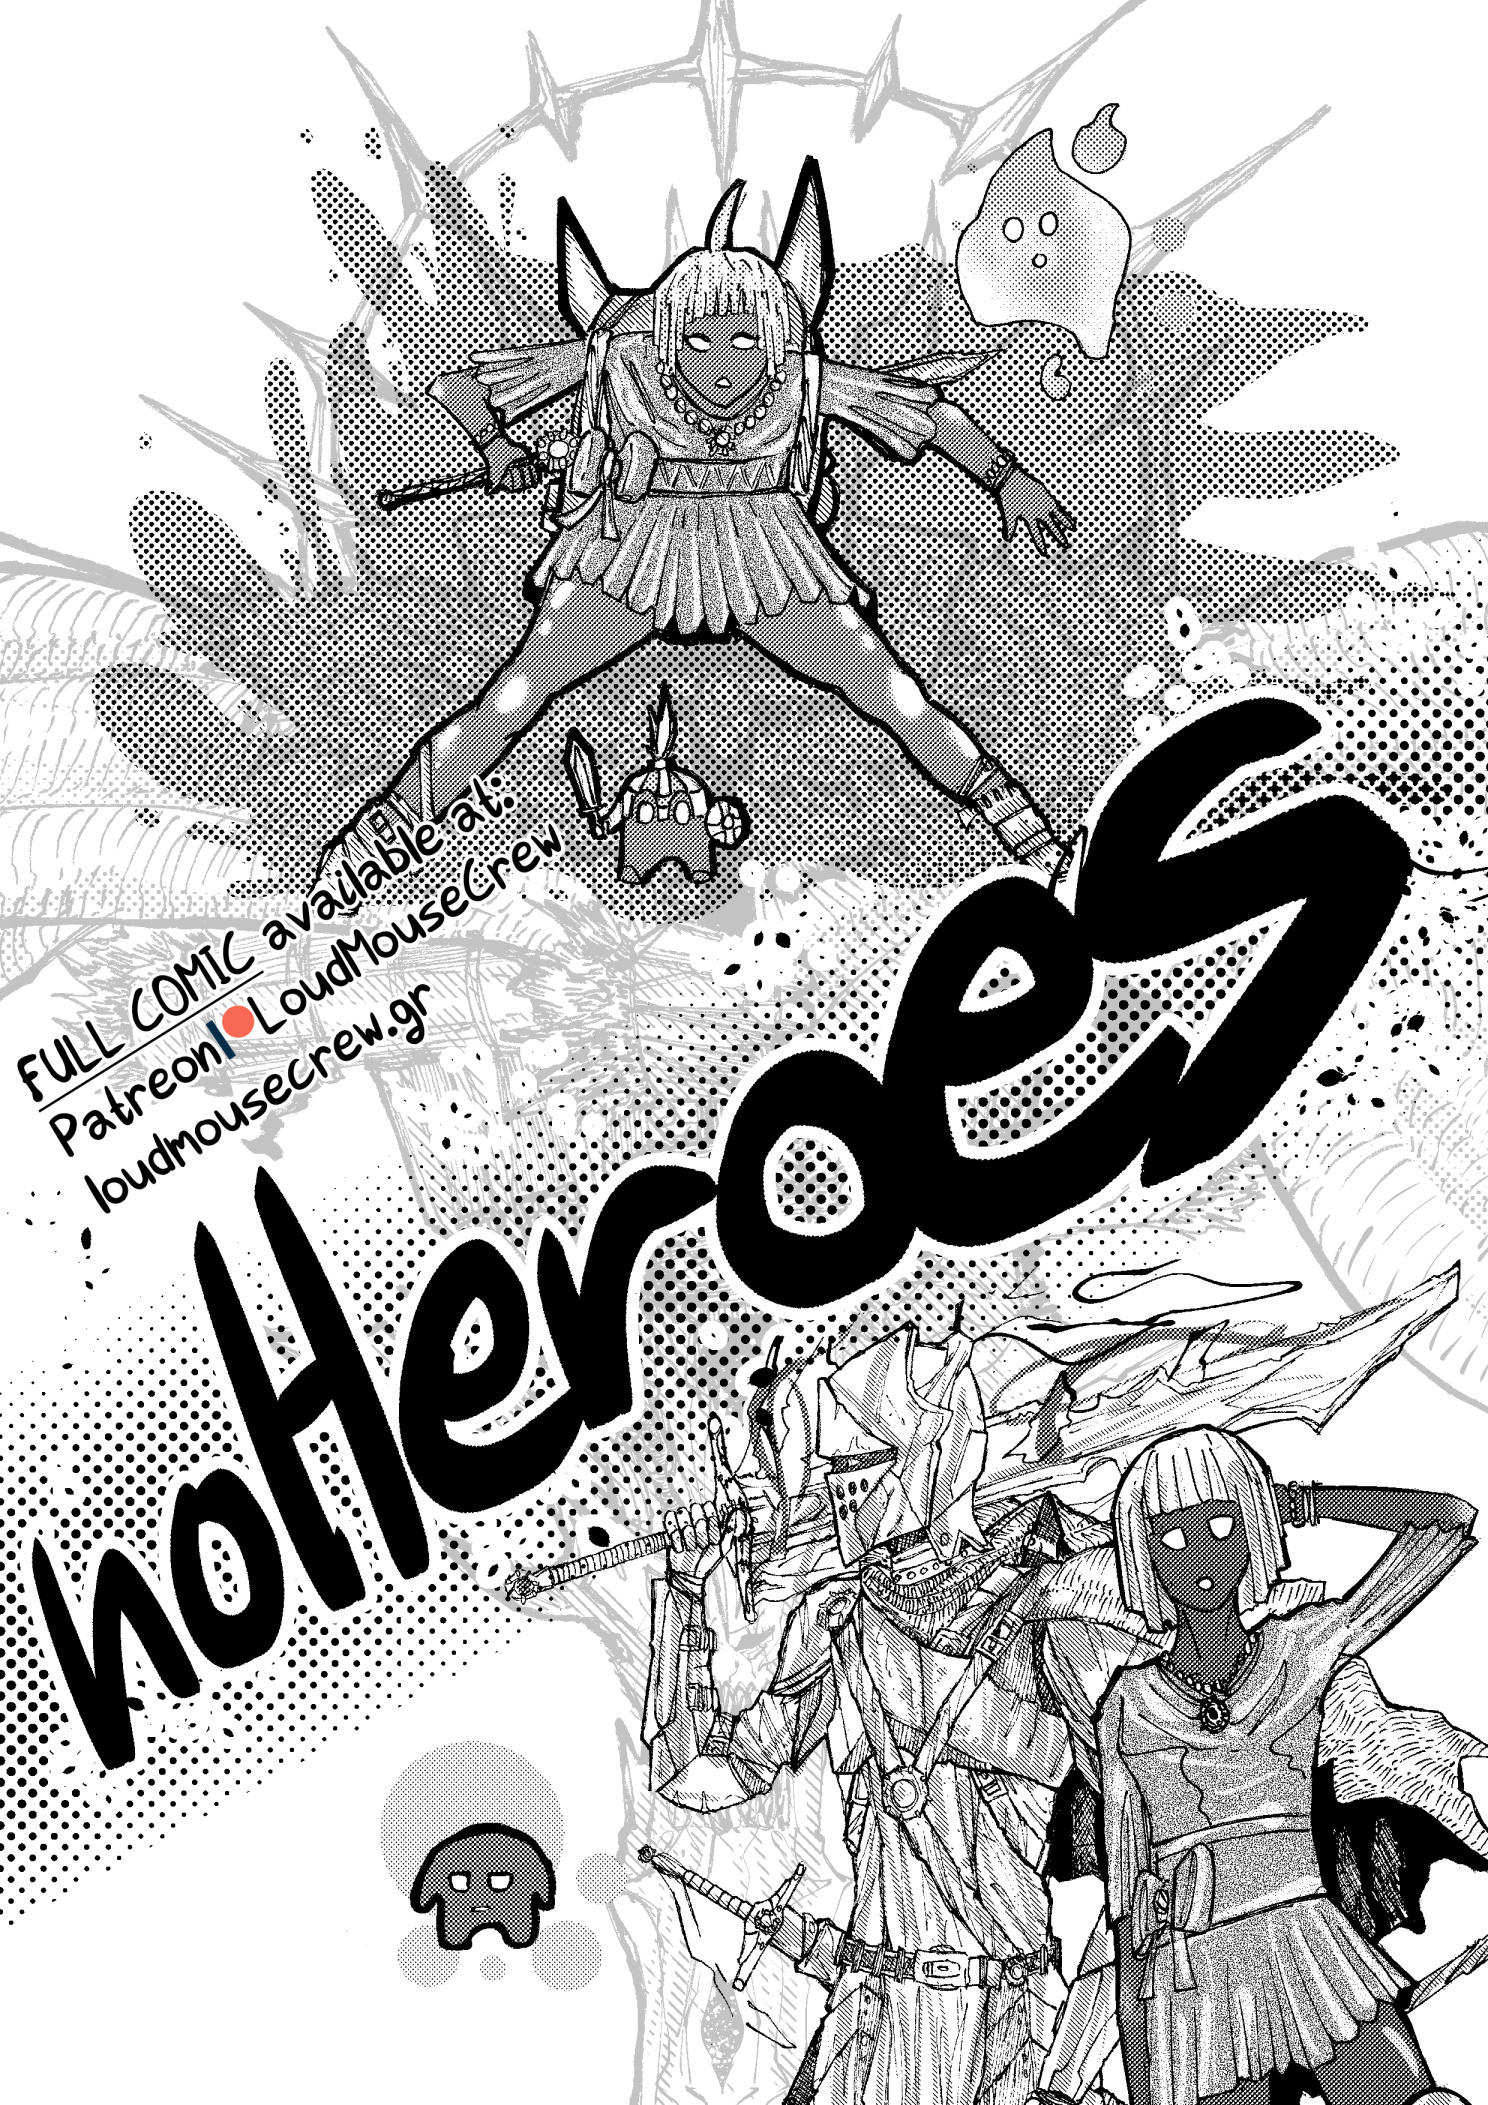 Noheroes! - Page 2